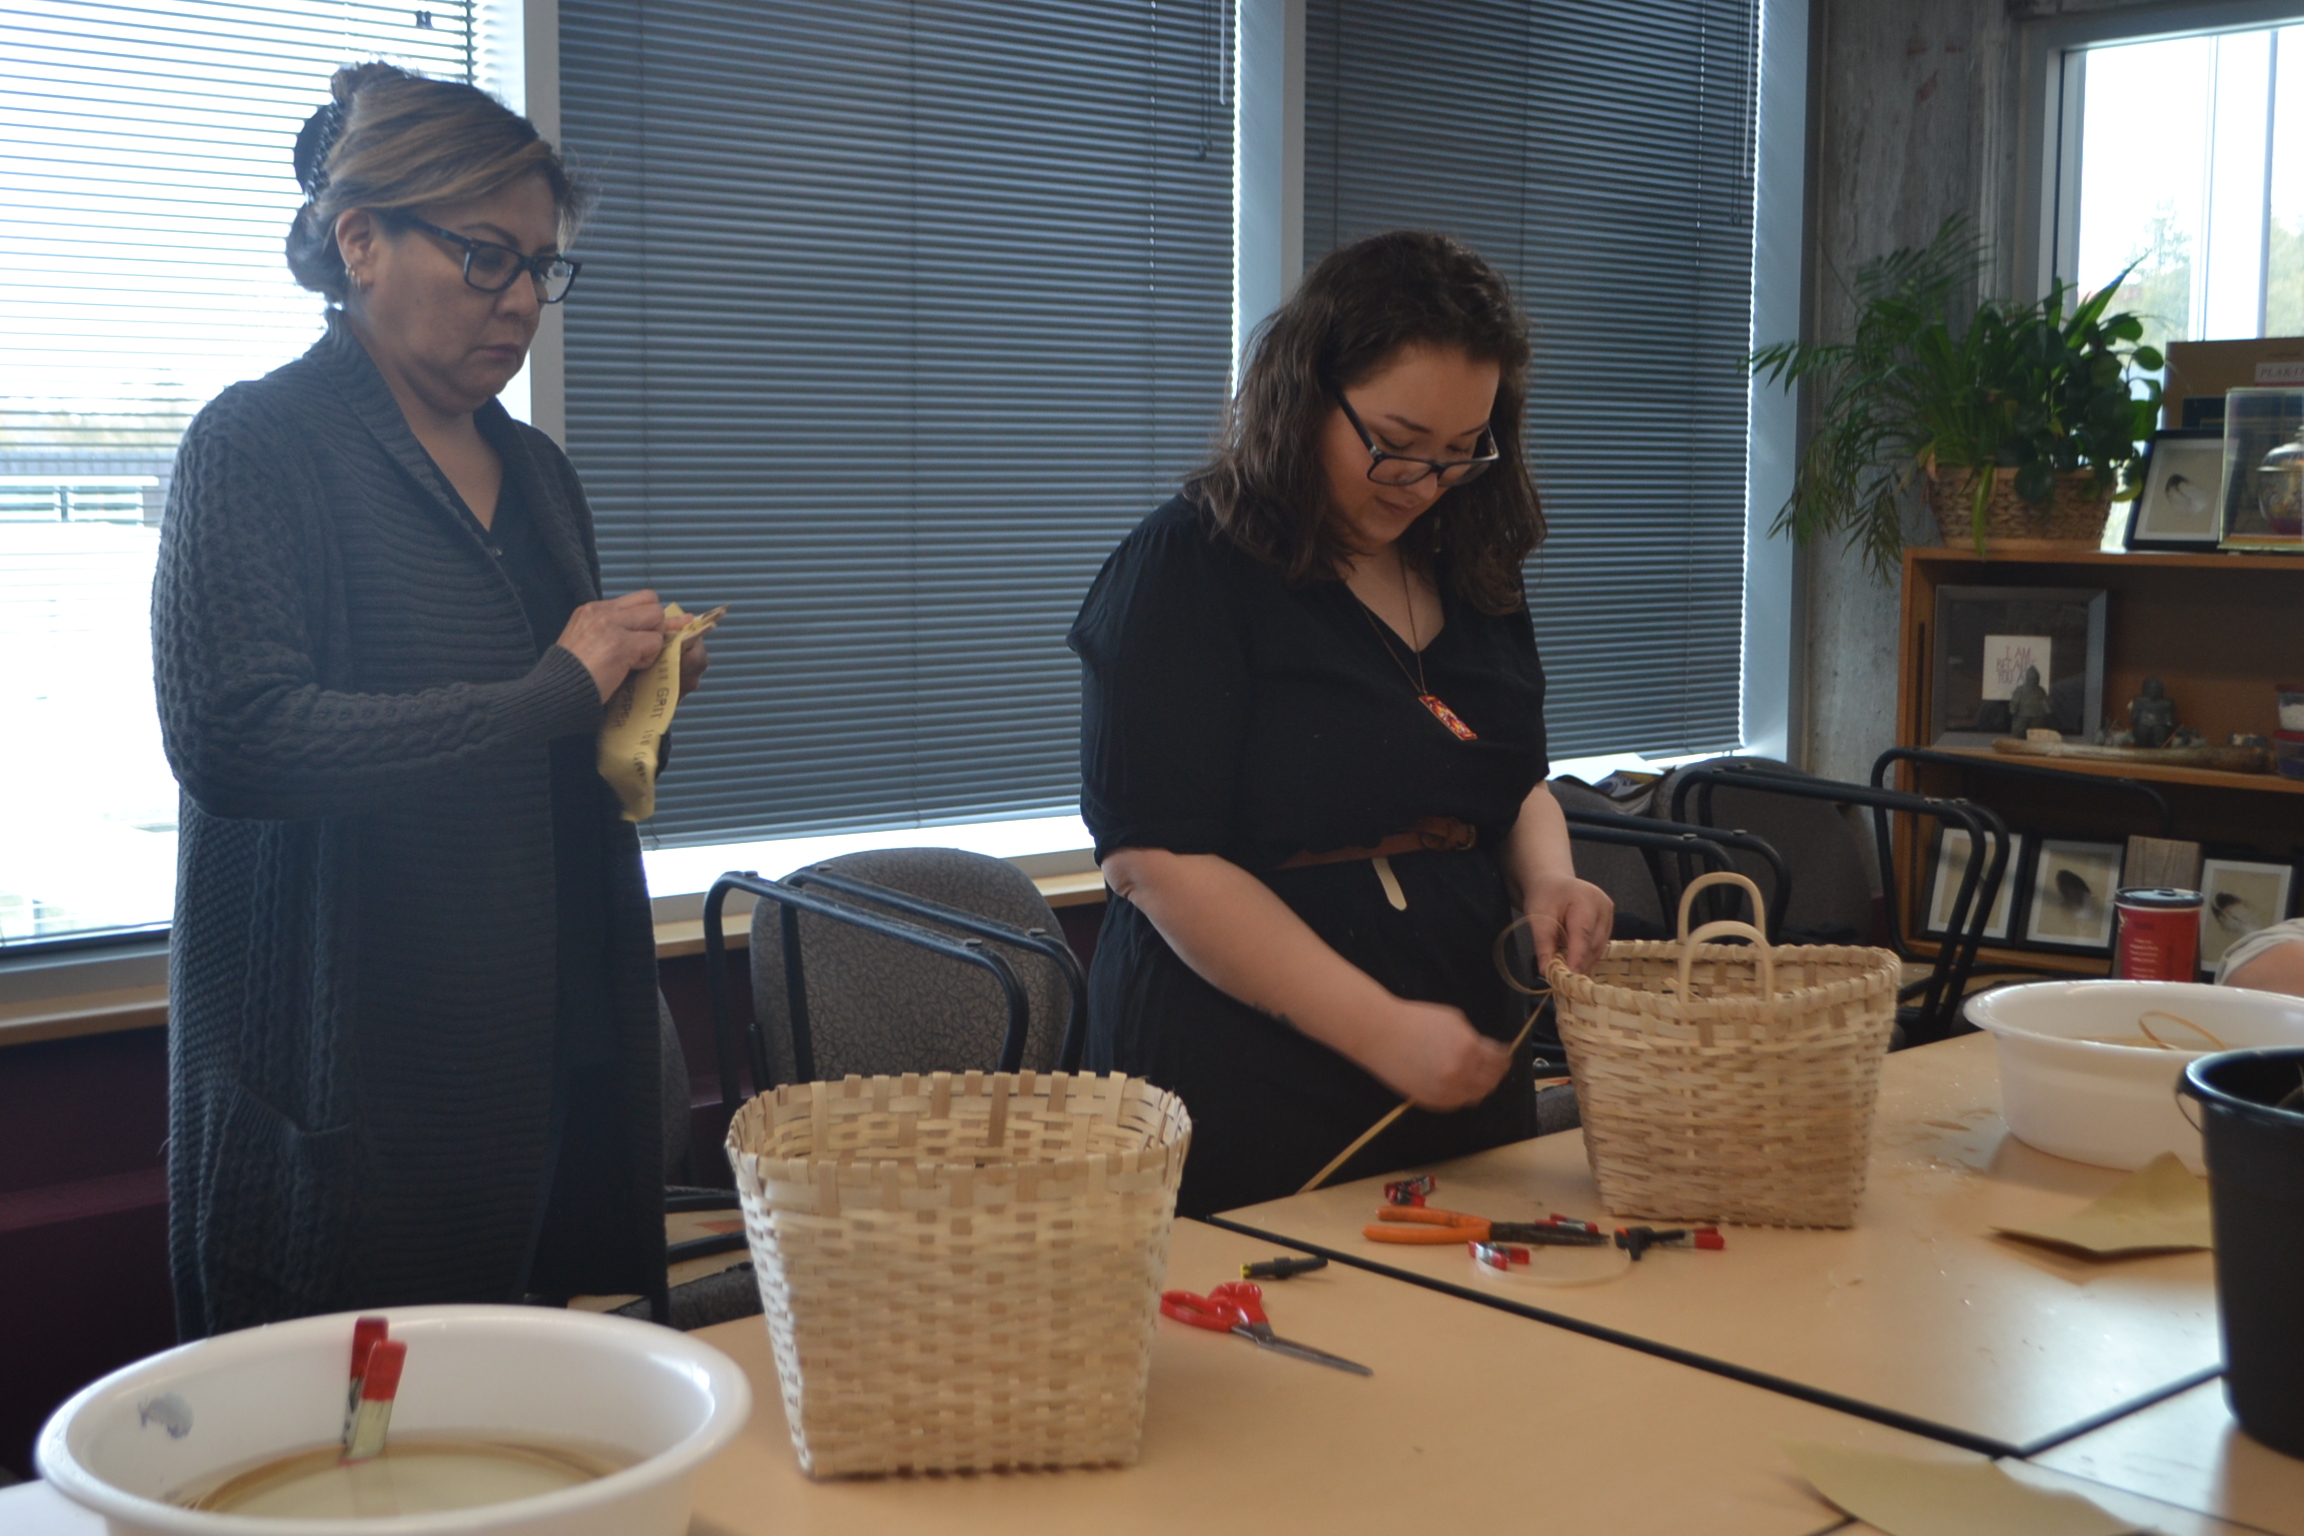 Students working on baskets